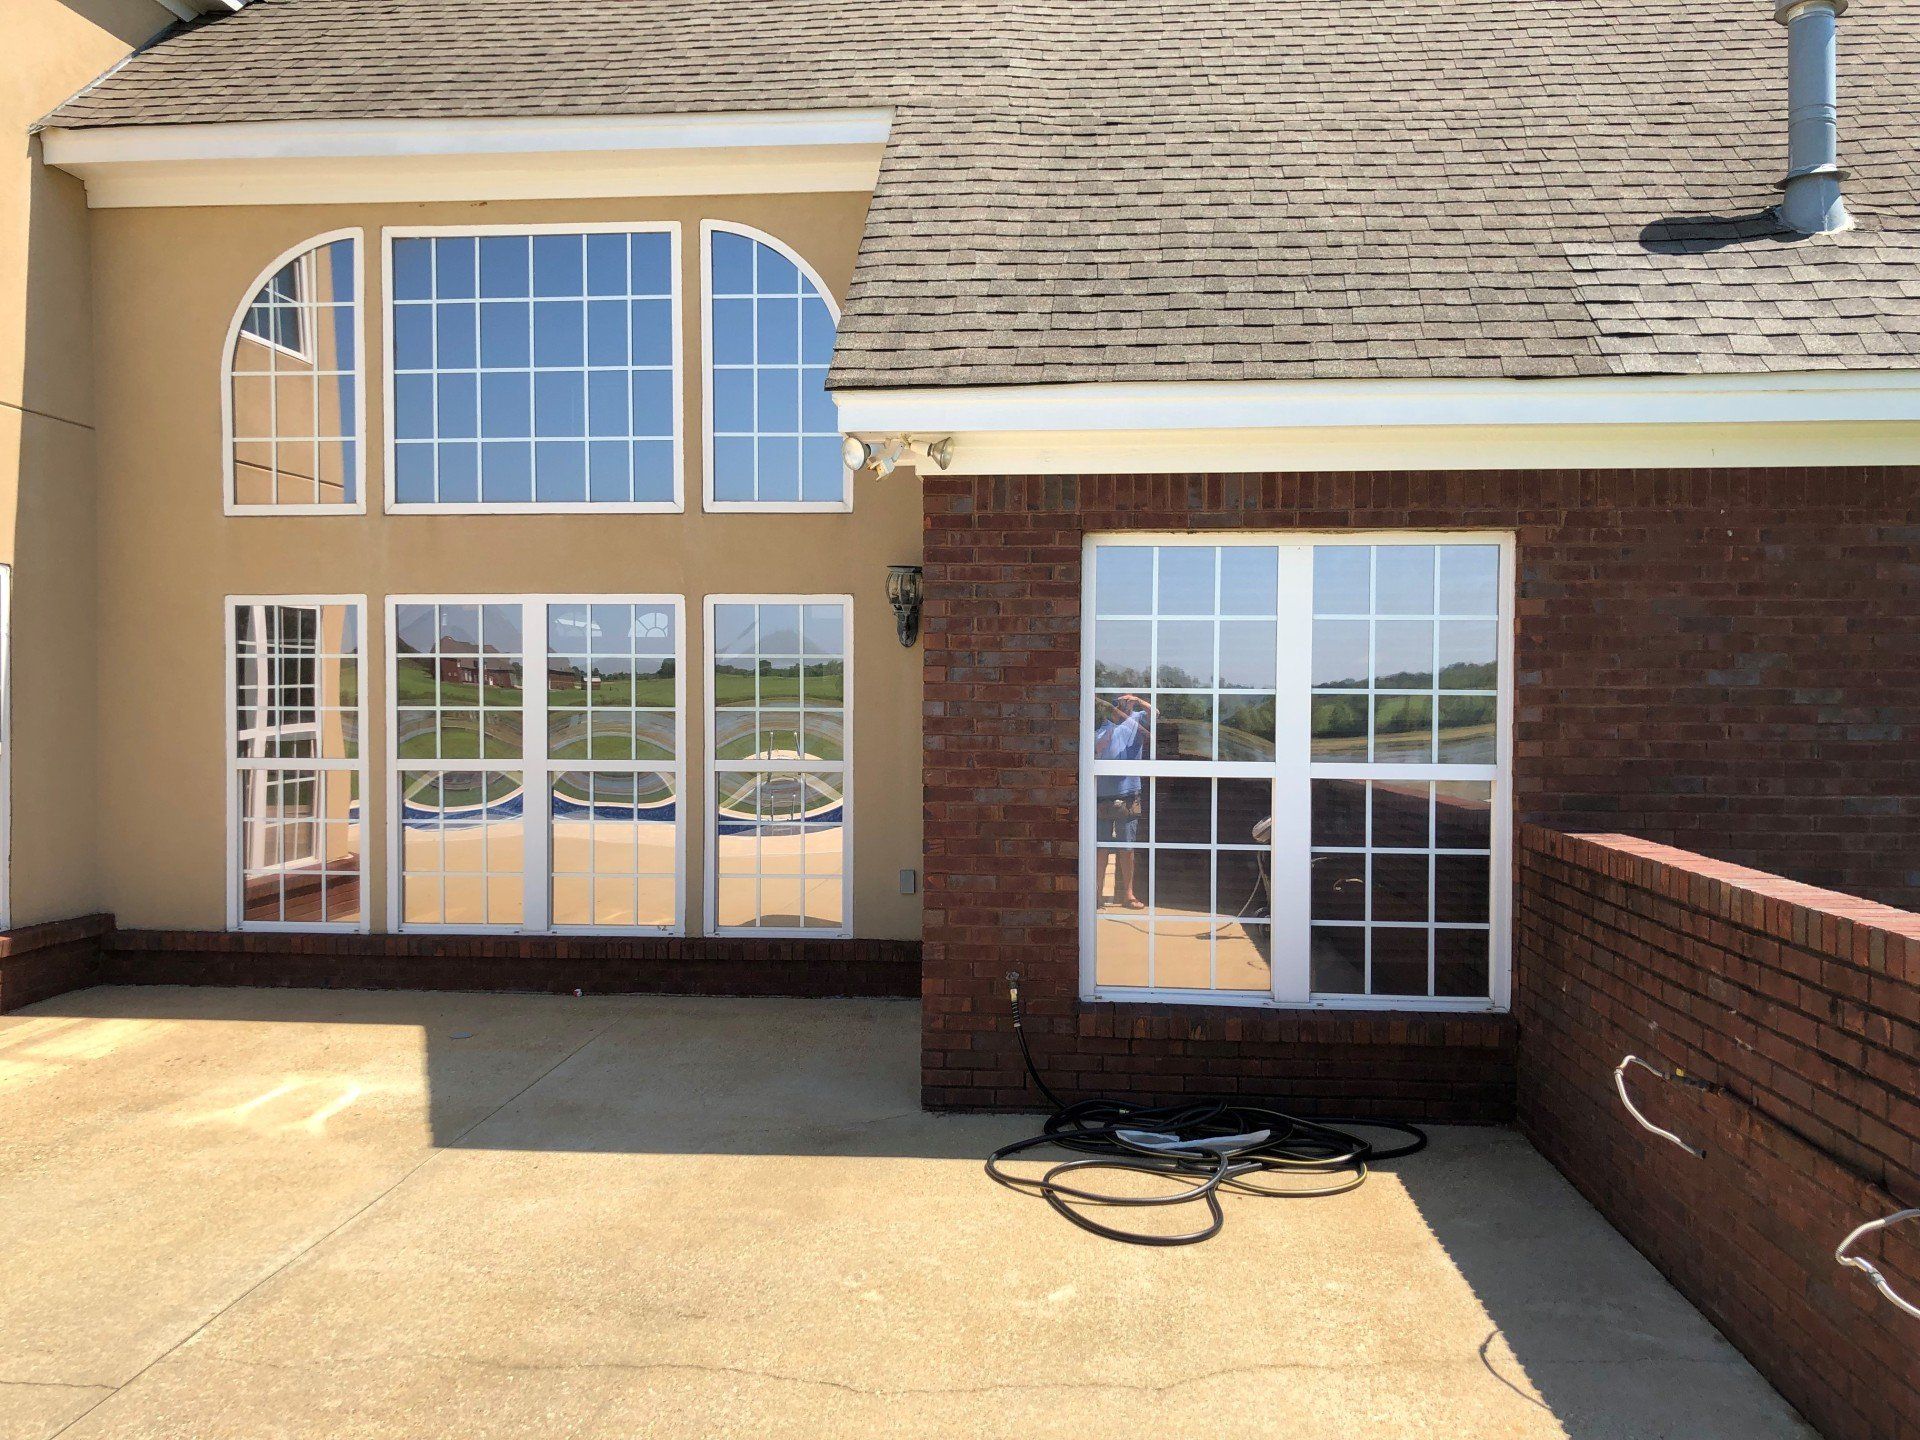 Professionally installed spf tint to home windows on 9.5.2019 - Residential Tinting Service in Hope Hull, AL